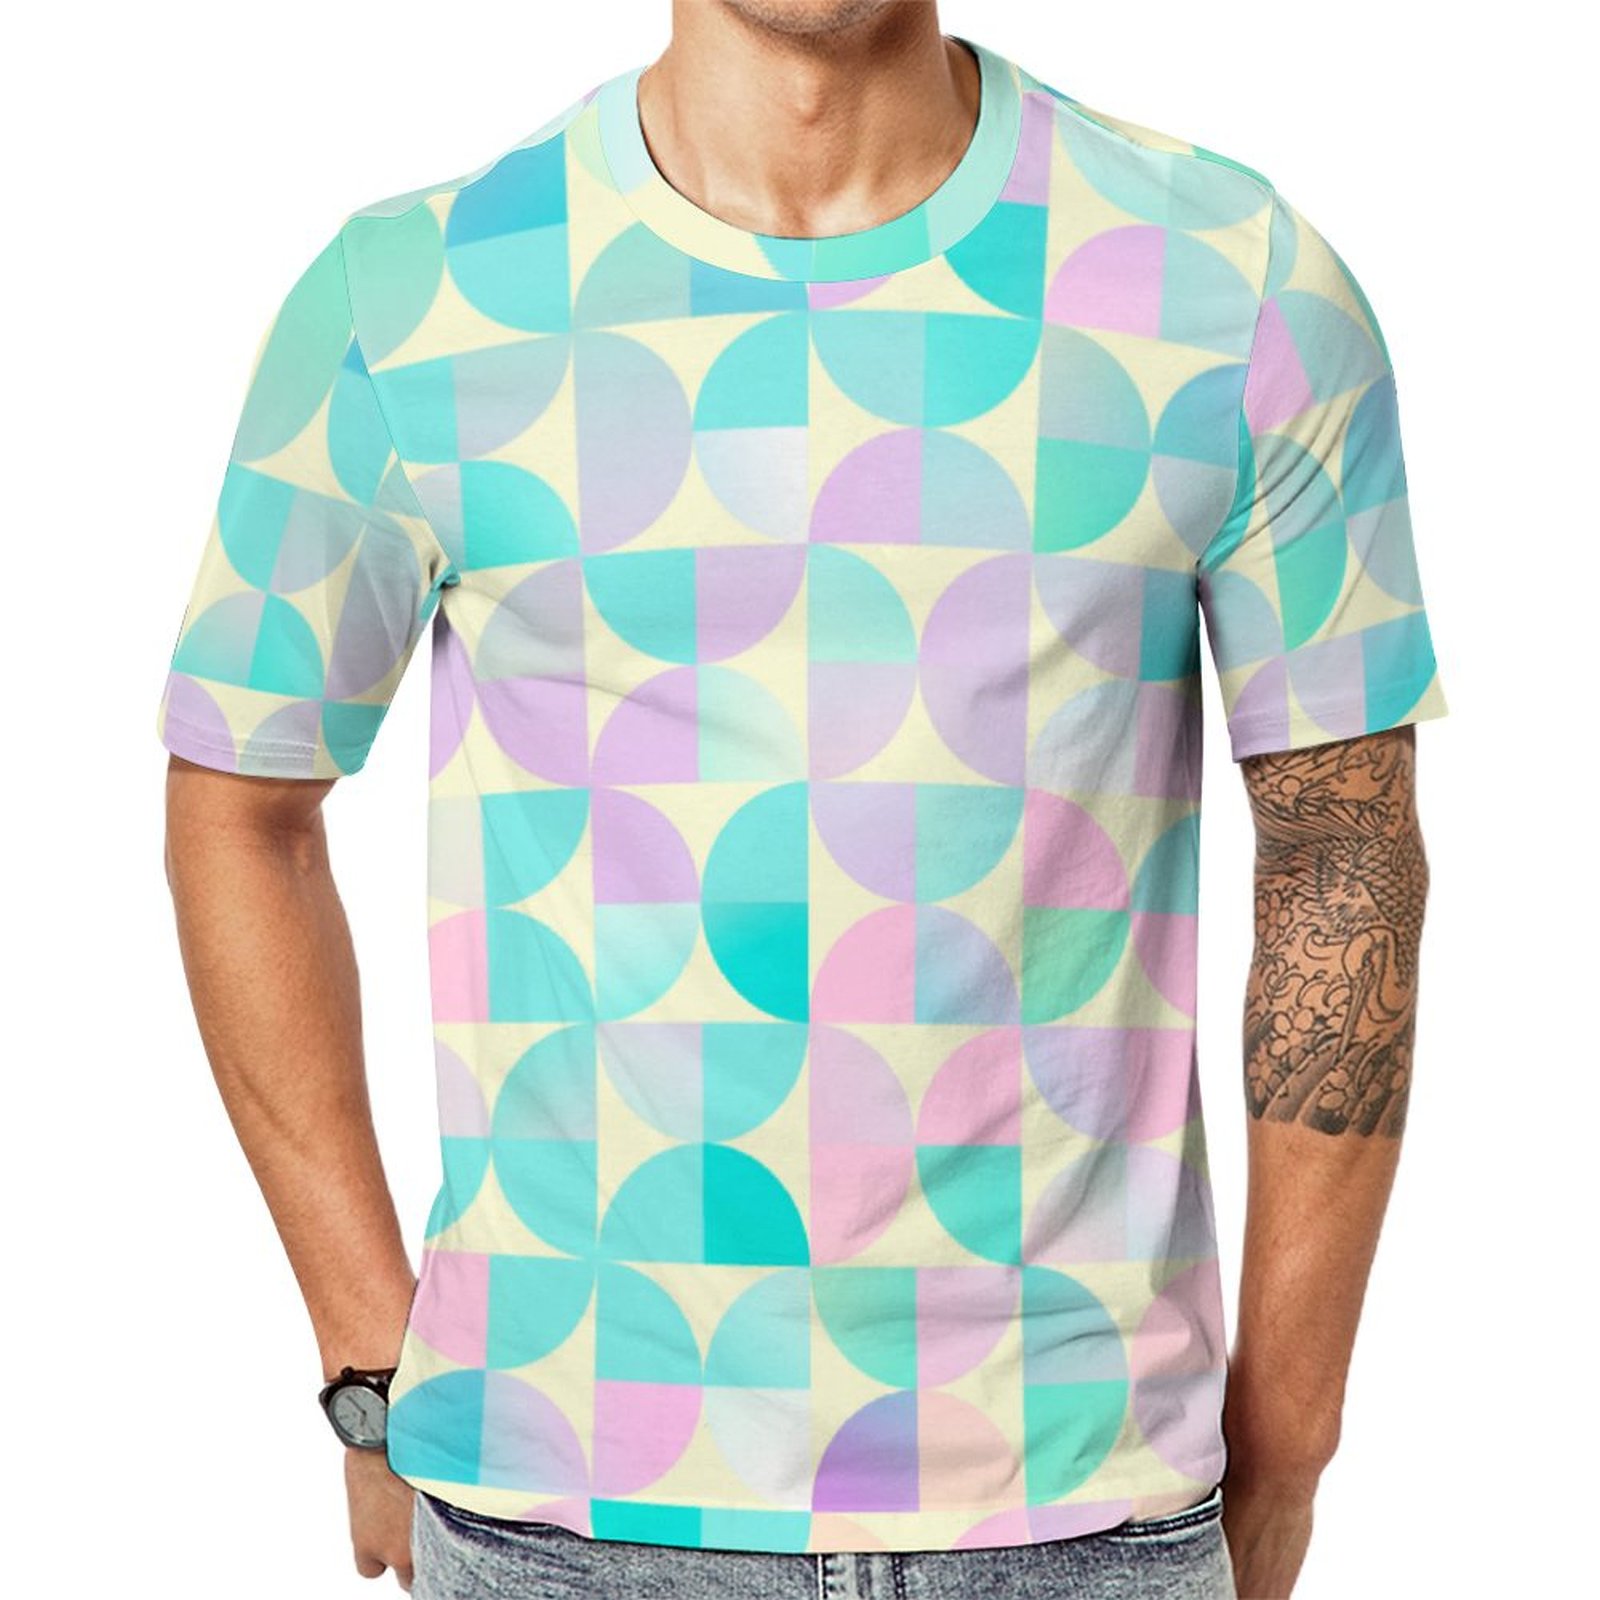 Geometric Holographic Iridescent Pastel Short Sleeve Print Unisex Tshirt Summer Casual Tees for Men and Women Coolcoshirts